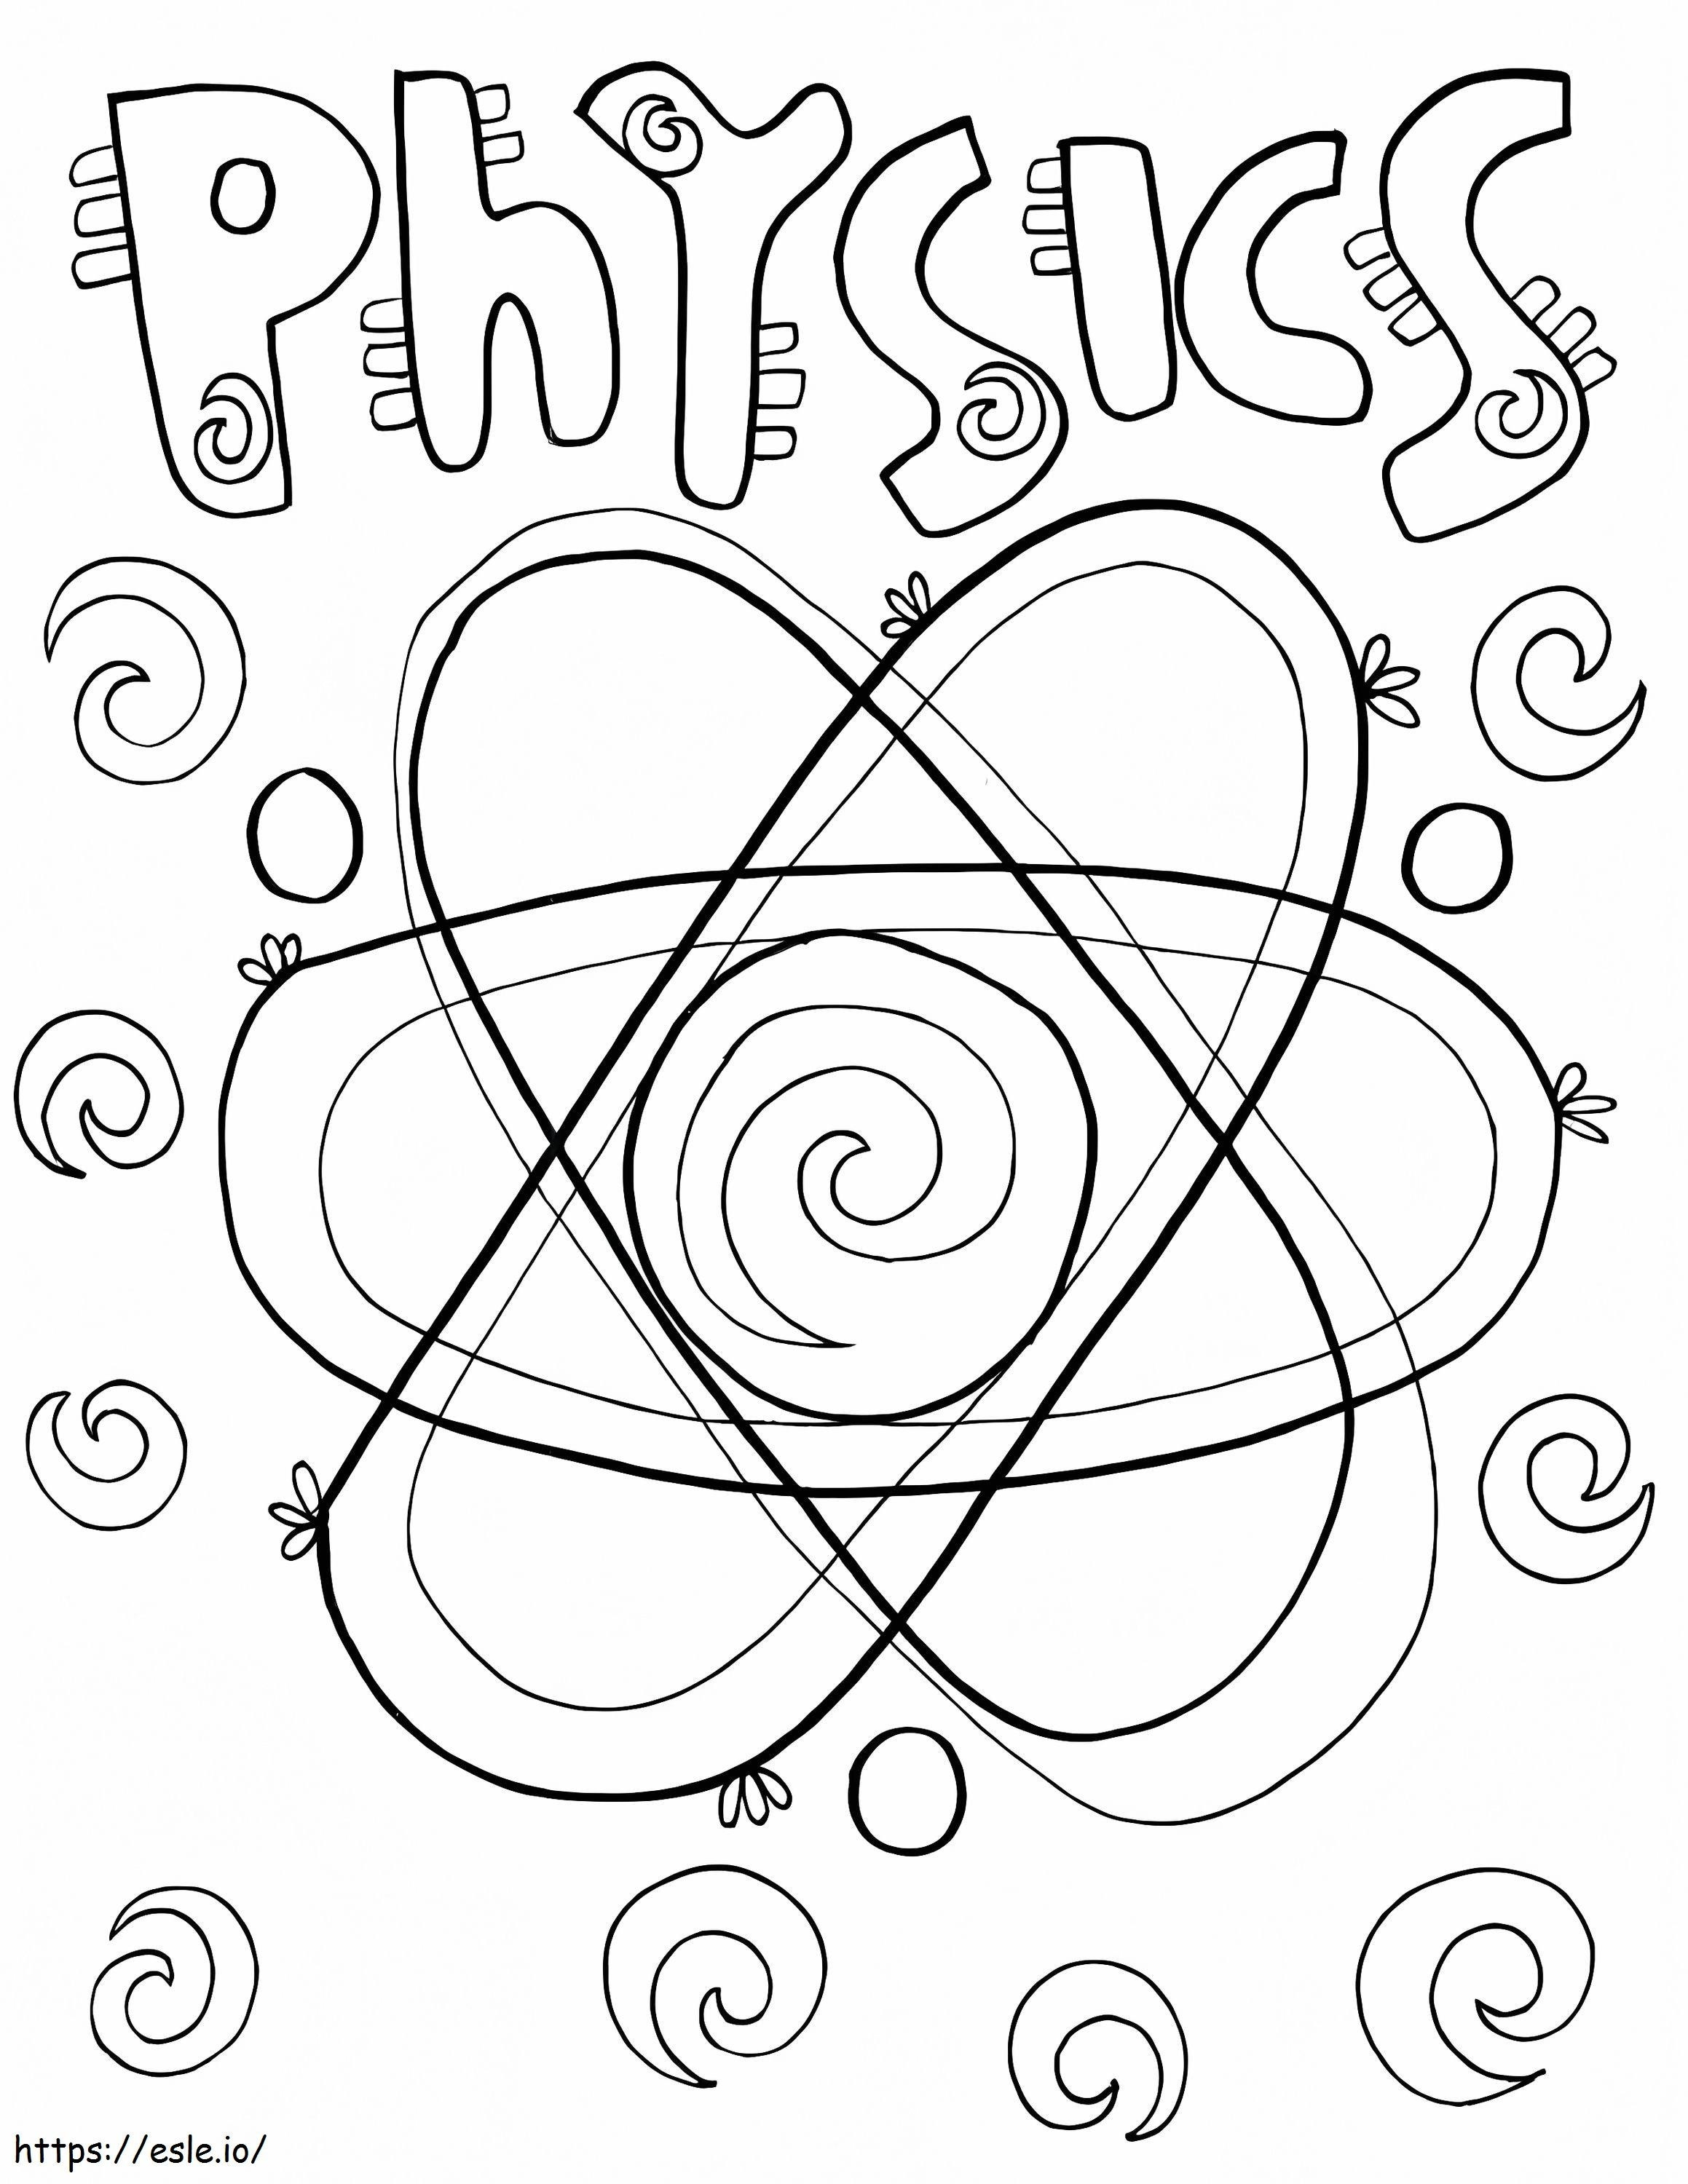 Physics Scientist coloring page